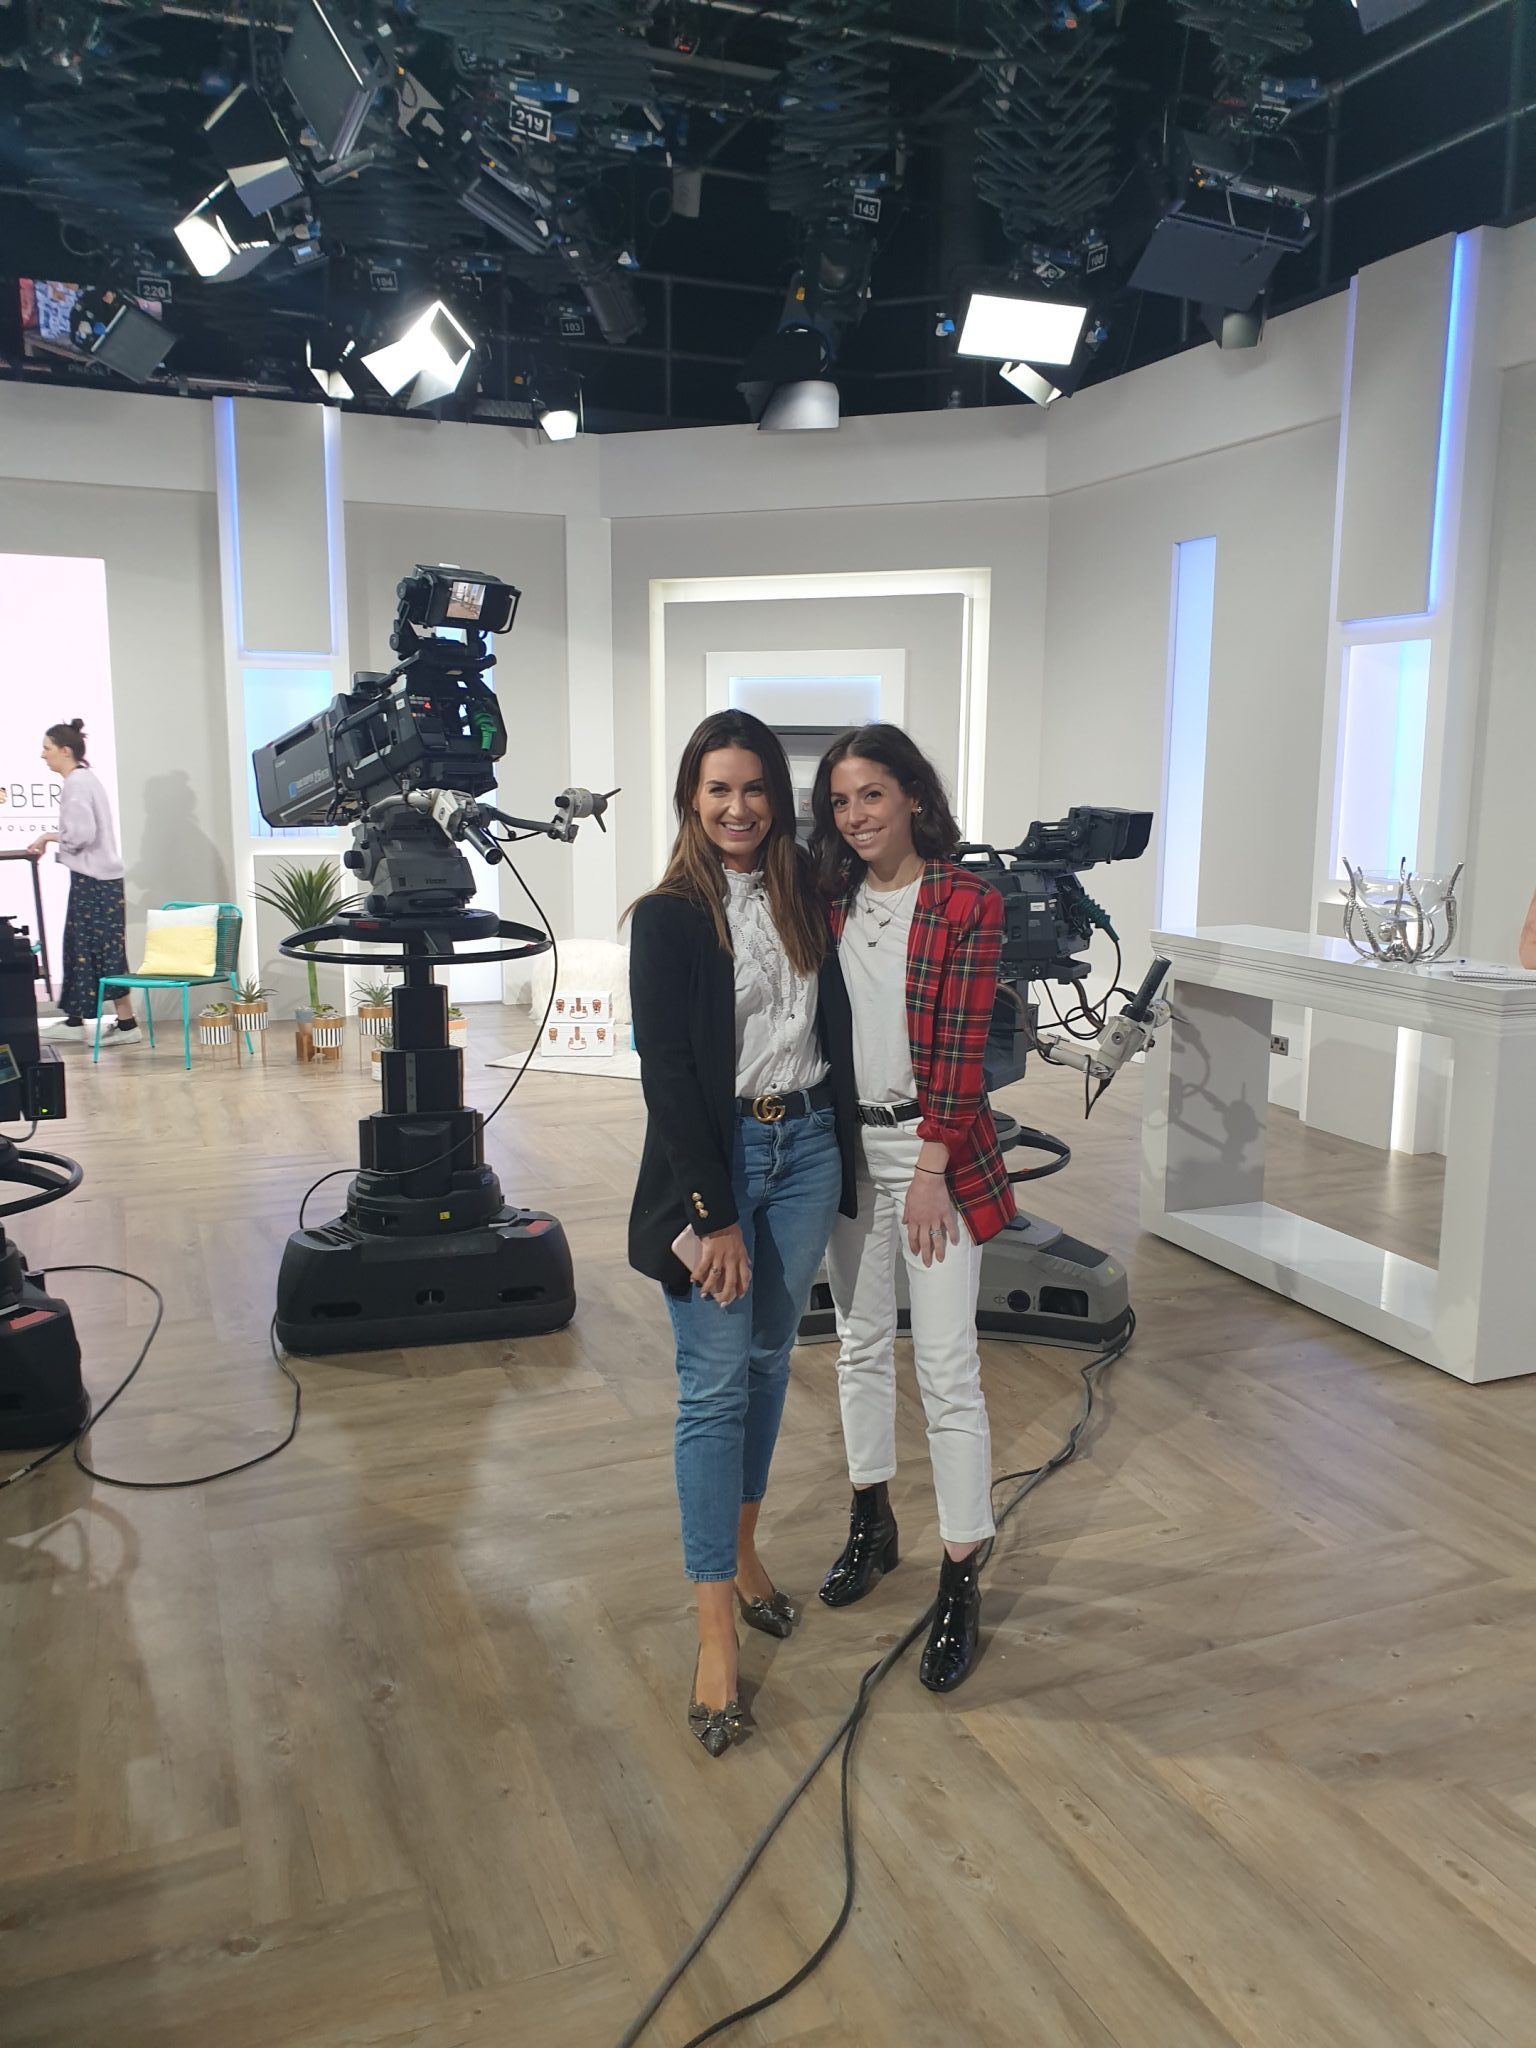 OUR LOVE AFFAIR WITH QVC